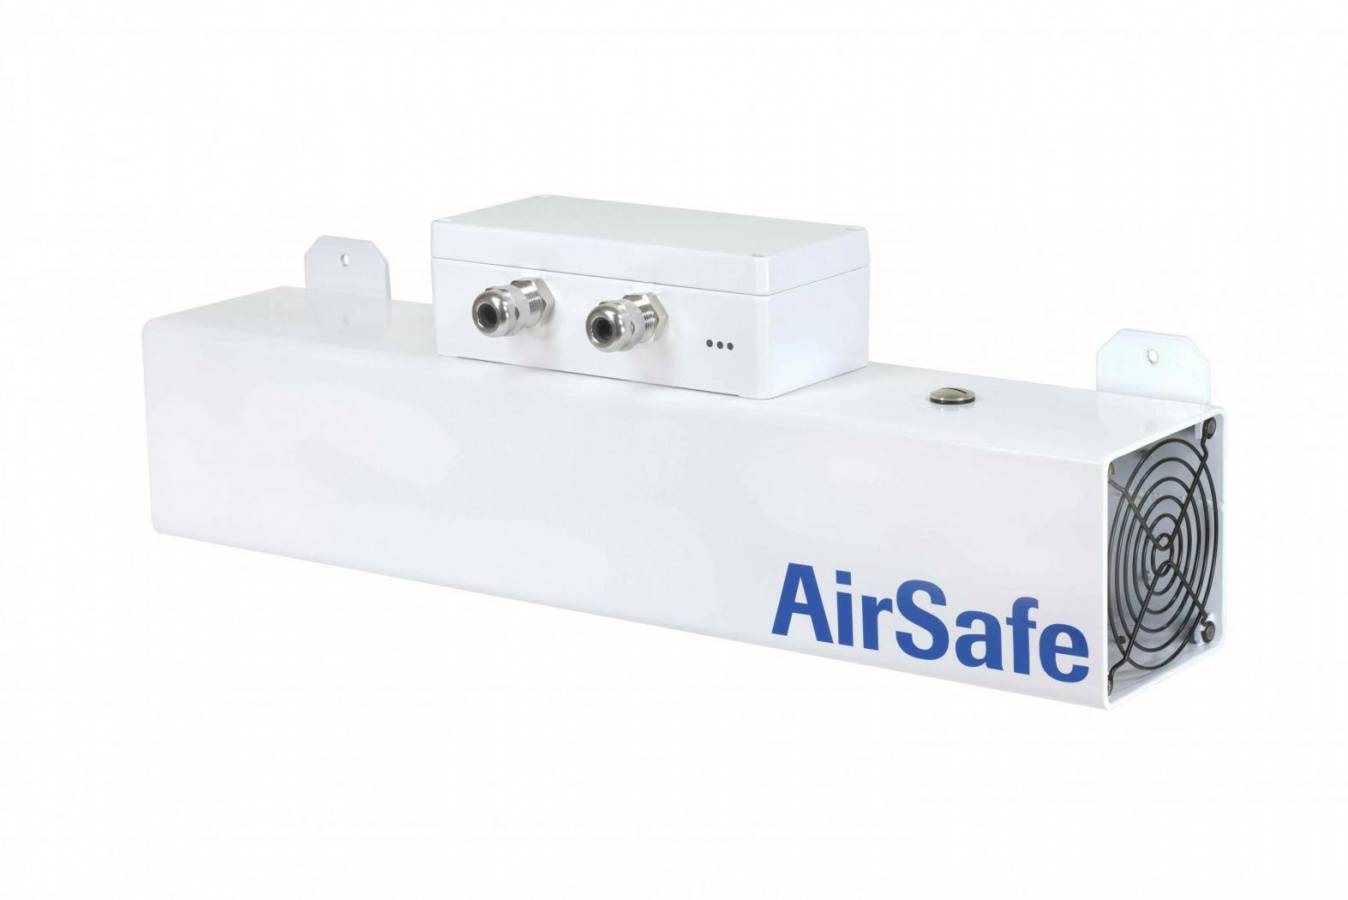 Monitored and regulated dust measurement in ambient air AirSafe 2 with fan control